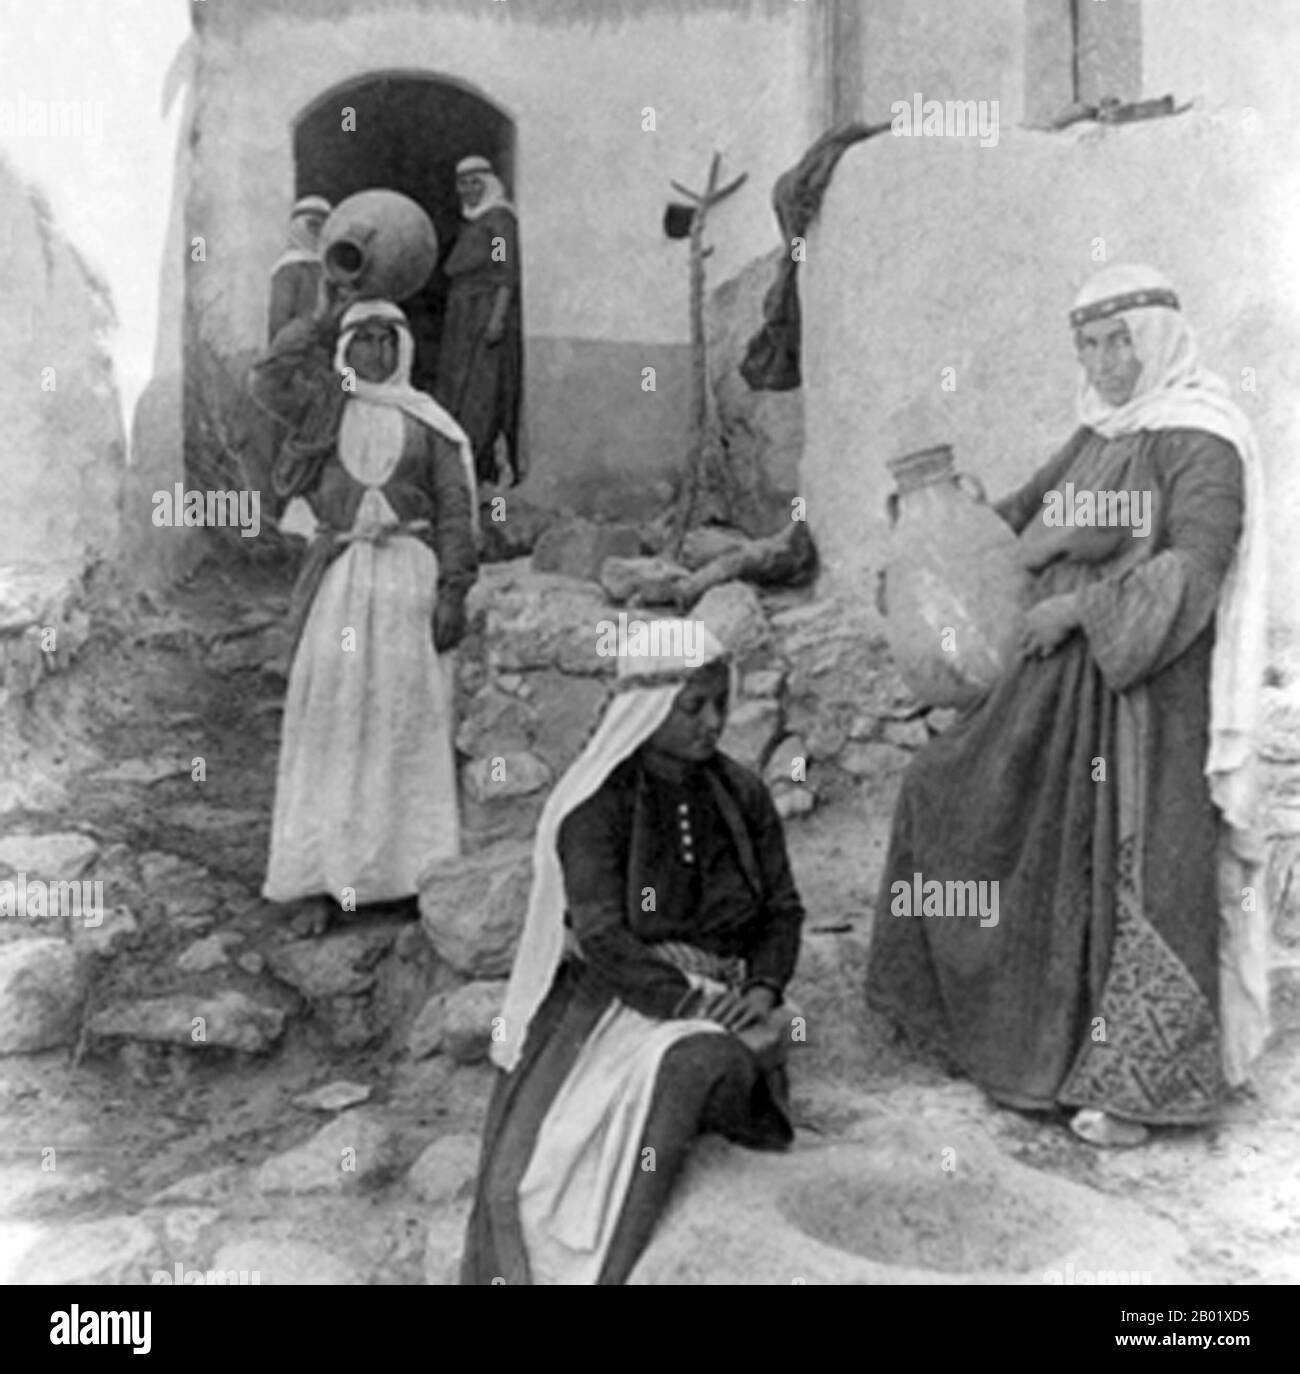 Palestine: Druze women, village of Dalieh, Mount Carmel, c. 1900.  Palestine is a name given to the geographic region between the Mediterranean Sea and the Jordan River. The region is also known as the Land of Israel, the Holy Land and the Southern Levant.  In 1832 Palestine was conquered by Muhammad Ali's Egypt, but in 1840 Britain intervened and returned control of the Levant to the Ottomans in return for further capitulations. The end of the 19th century saw the beginning of Zionist immigration and the Revival of the Hebrew language. Stock Photo